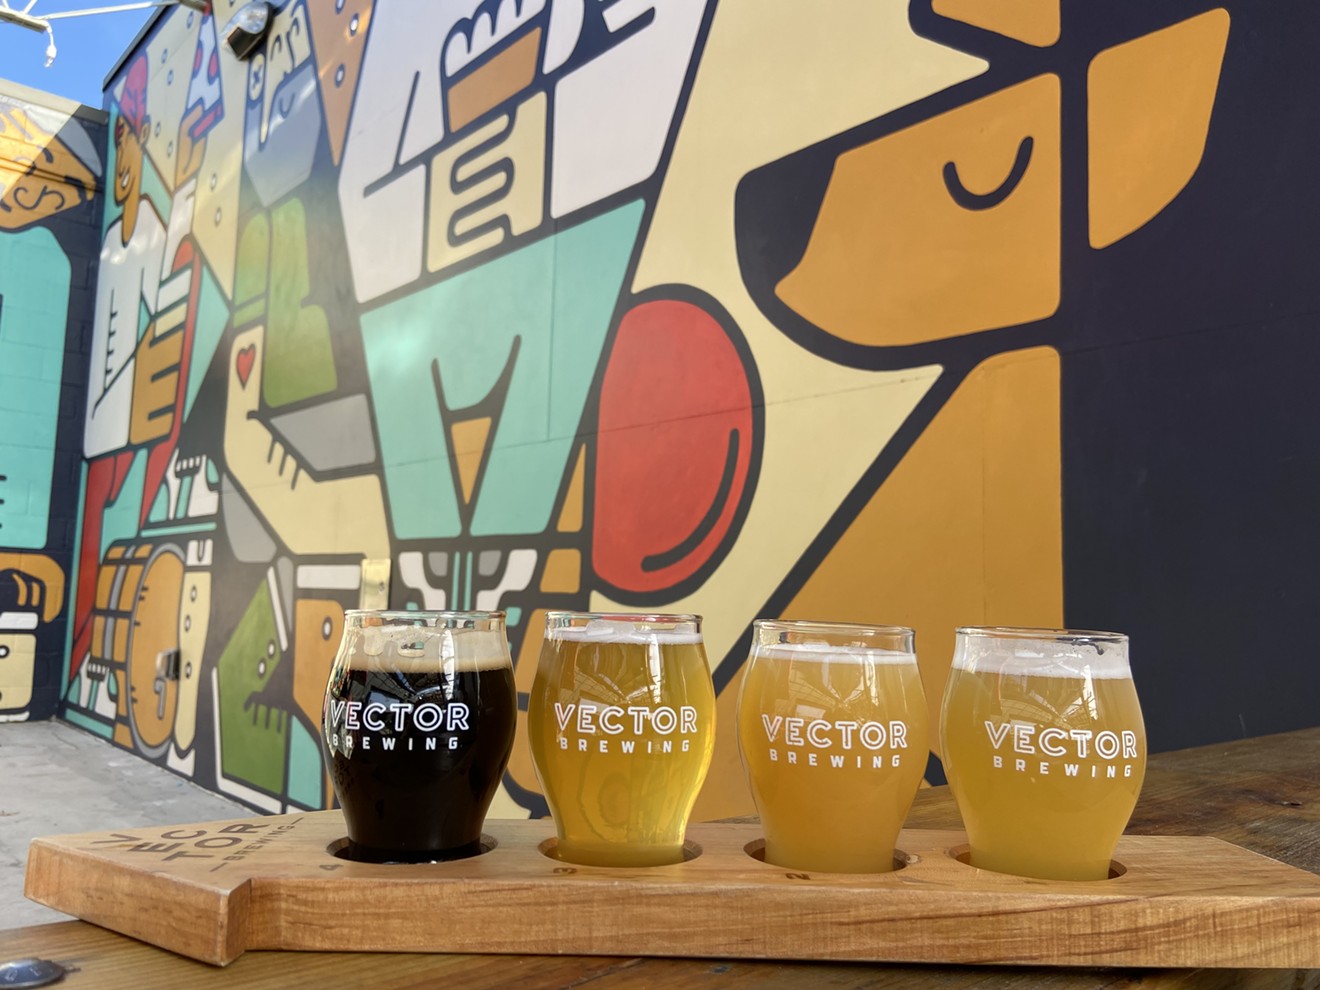 Lots of brewery events this weekend, including Vector Brewing's second anniversary party.